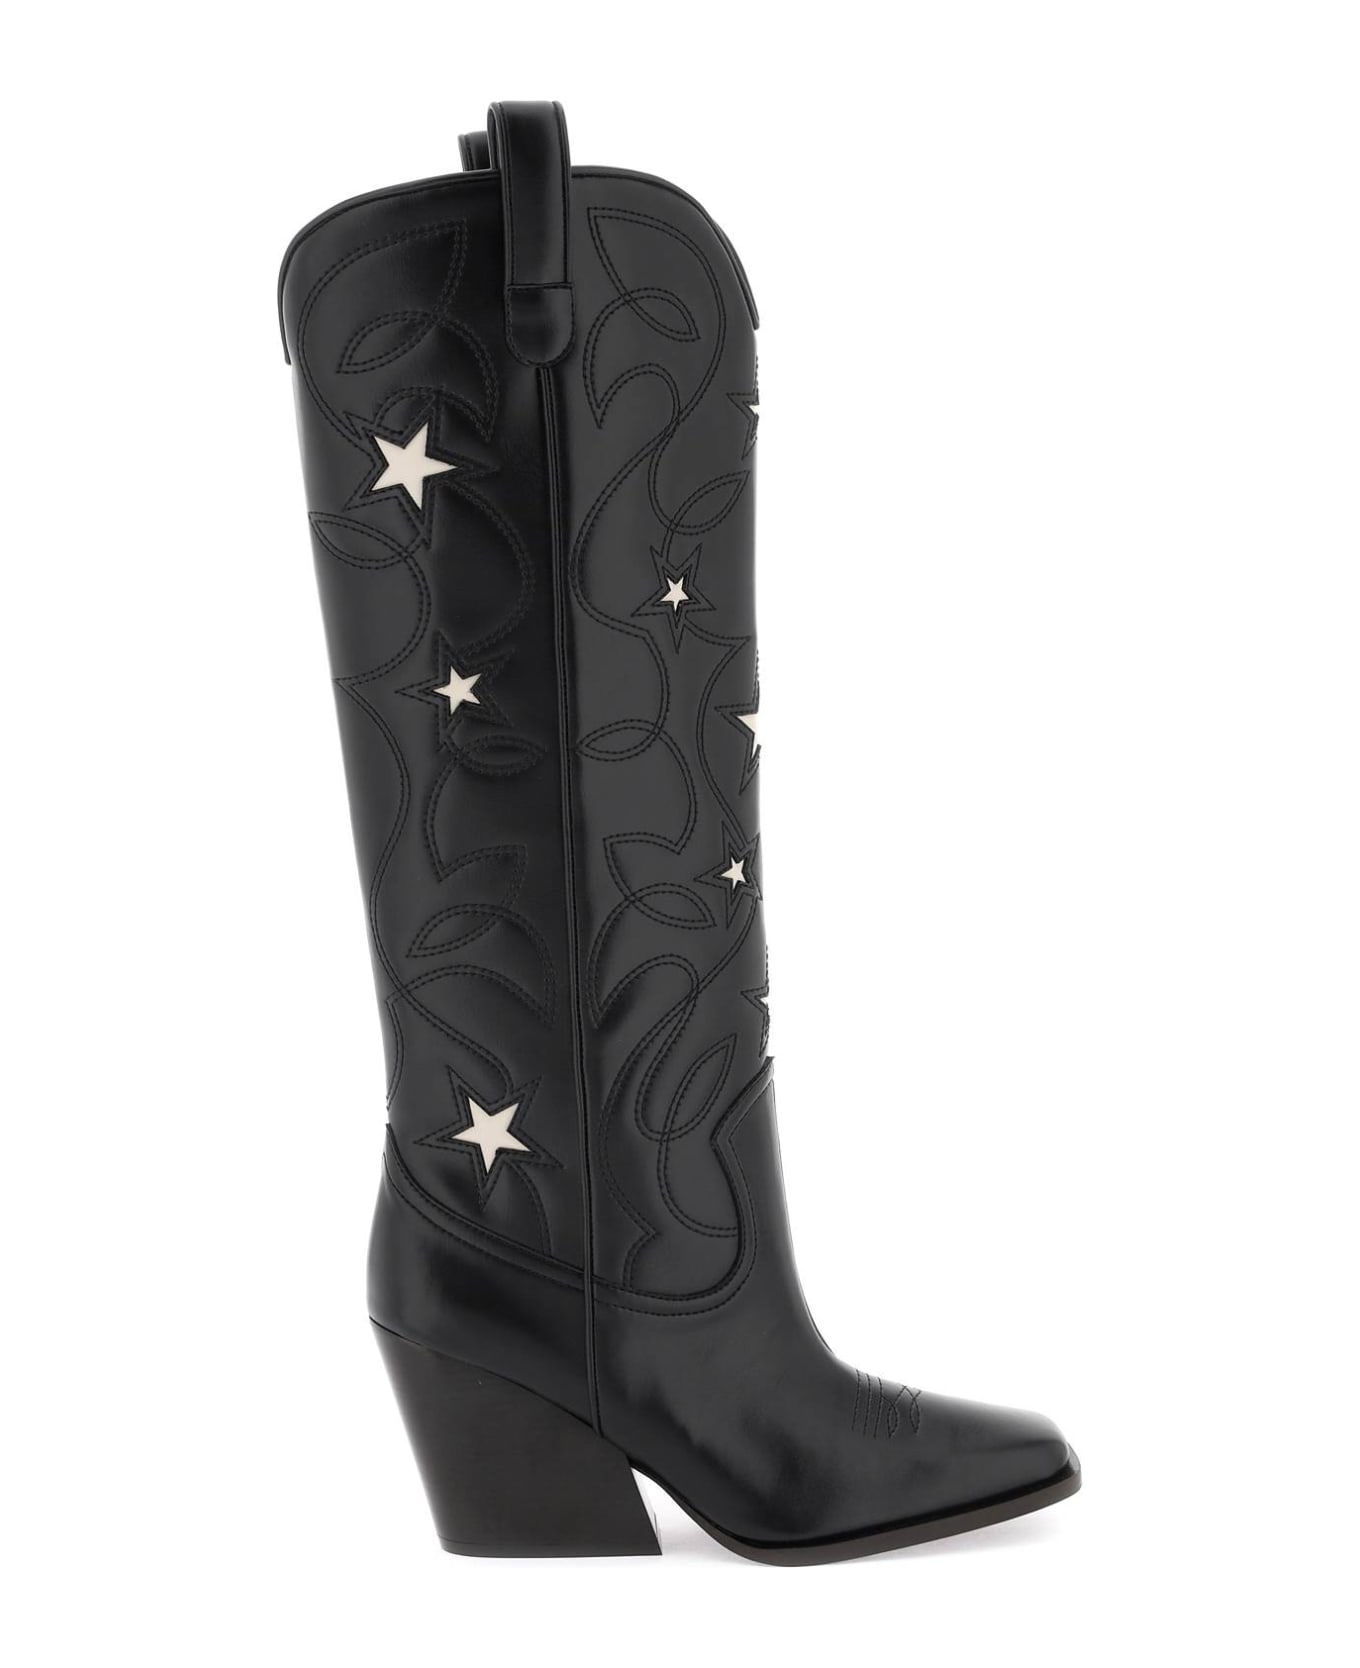 Stella McCartney Texan Boots With Star Embroidery - BLACK STONE (Black) ブーツ